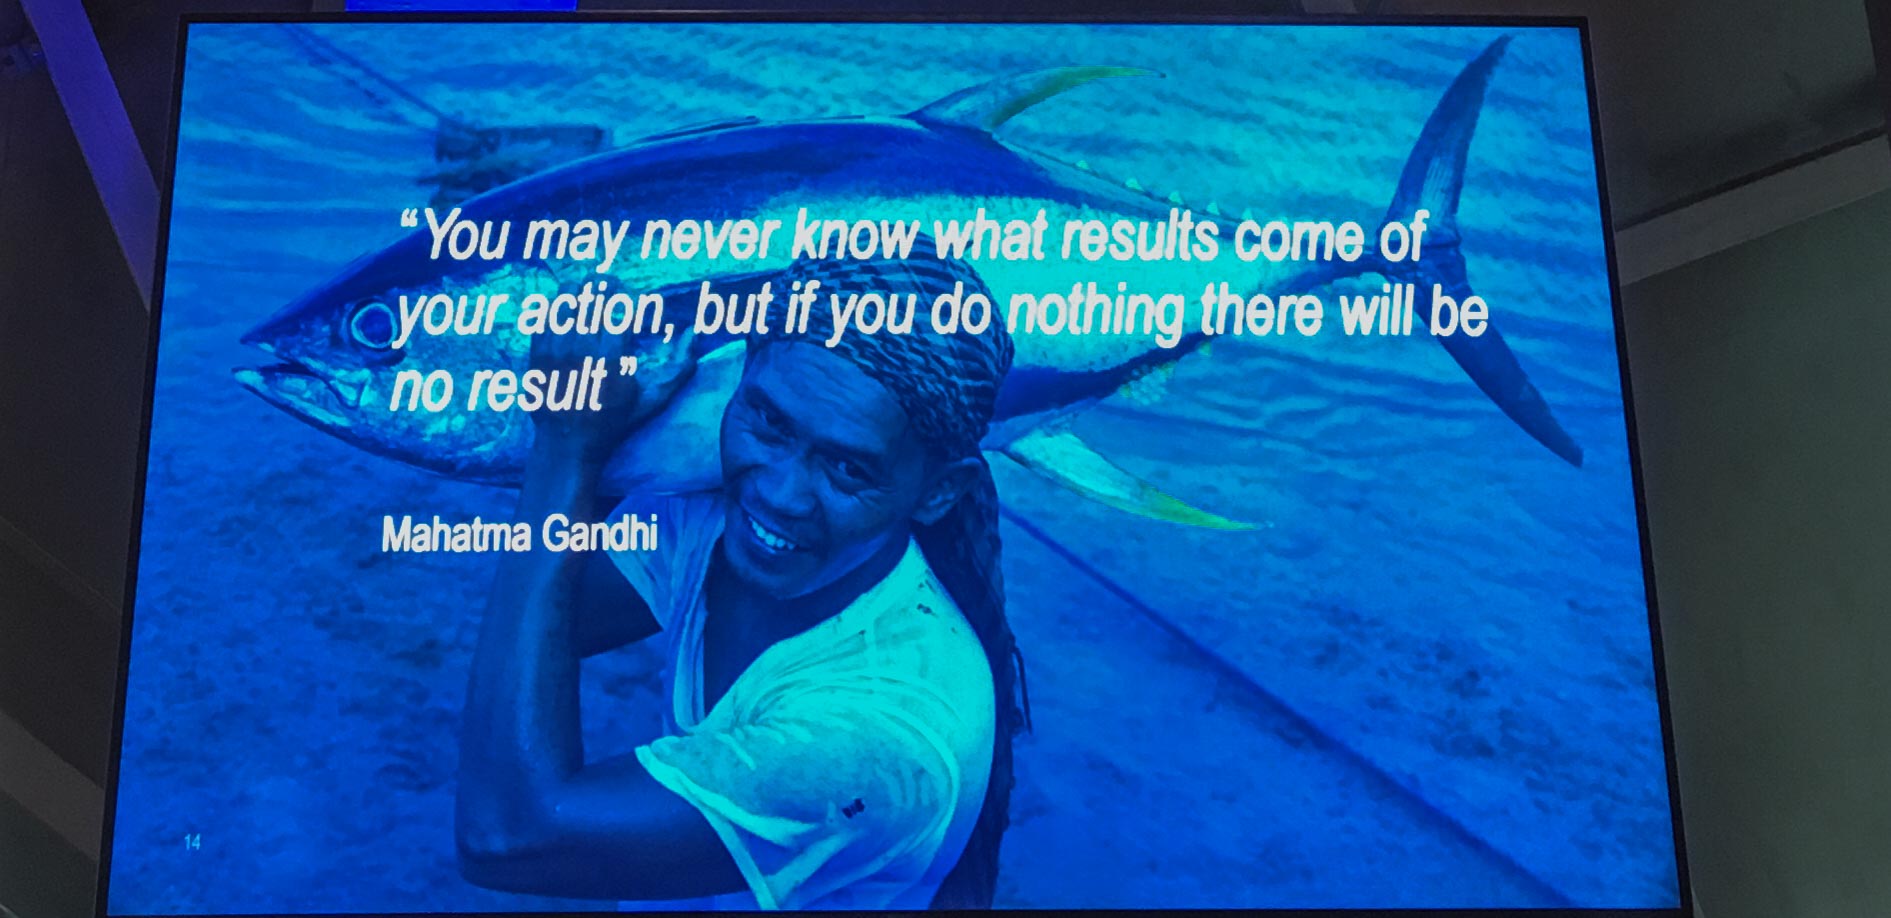 Slide from WWF presentation at 2019 World Seafood Expo Brussels with image of a person carrying a fish and quote "You may never know what results come of your action, but if you do nothing there will be no result" - Mahatma Gandhi